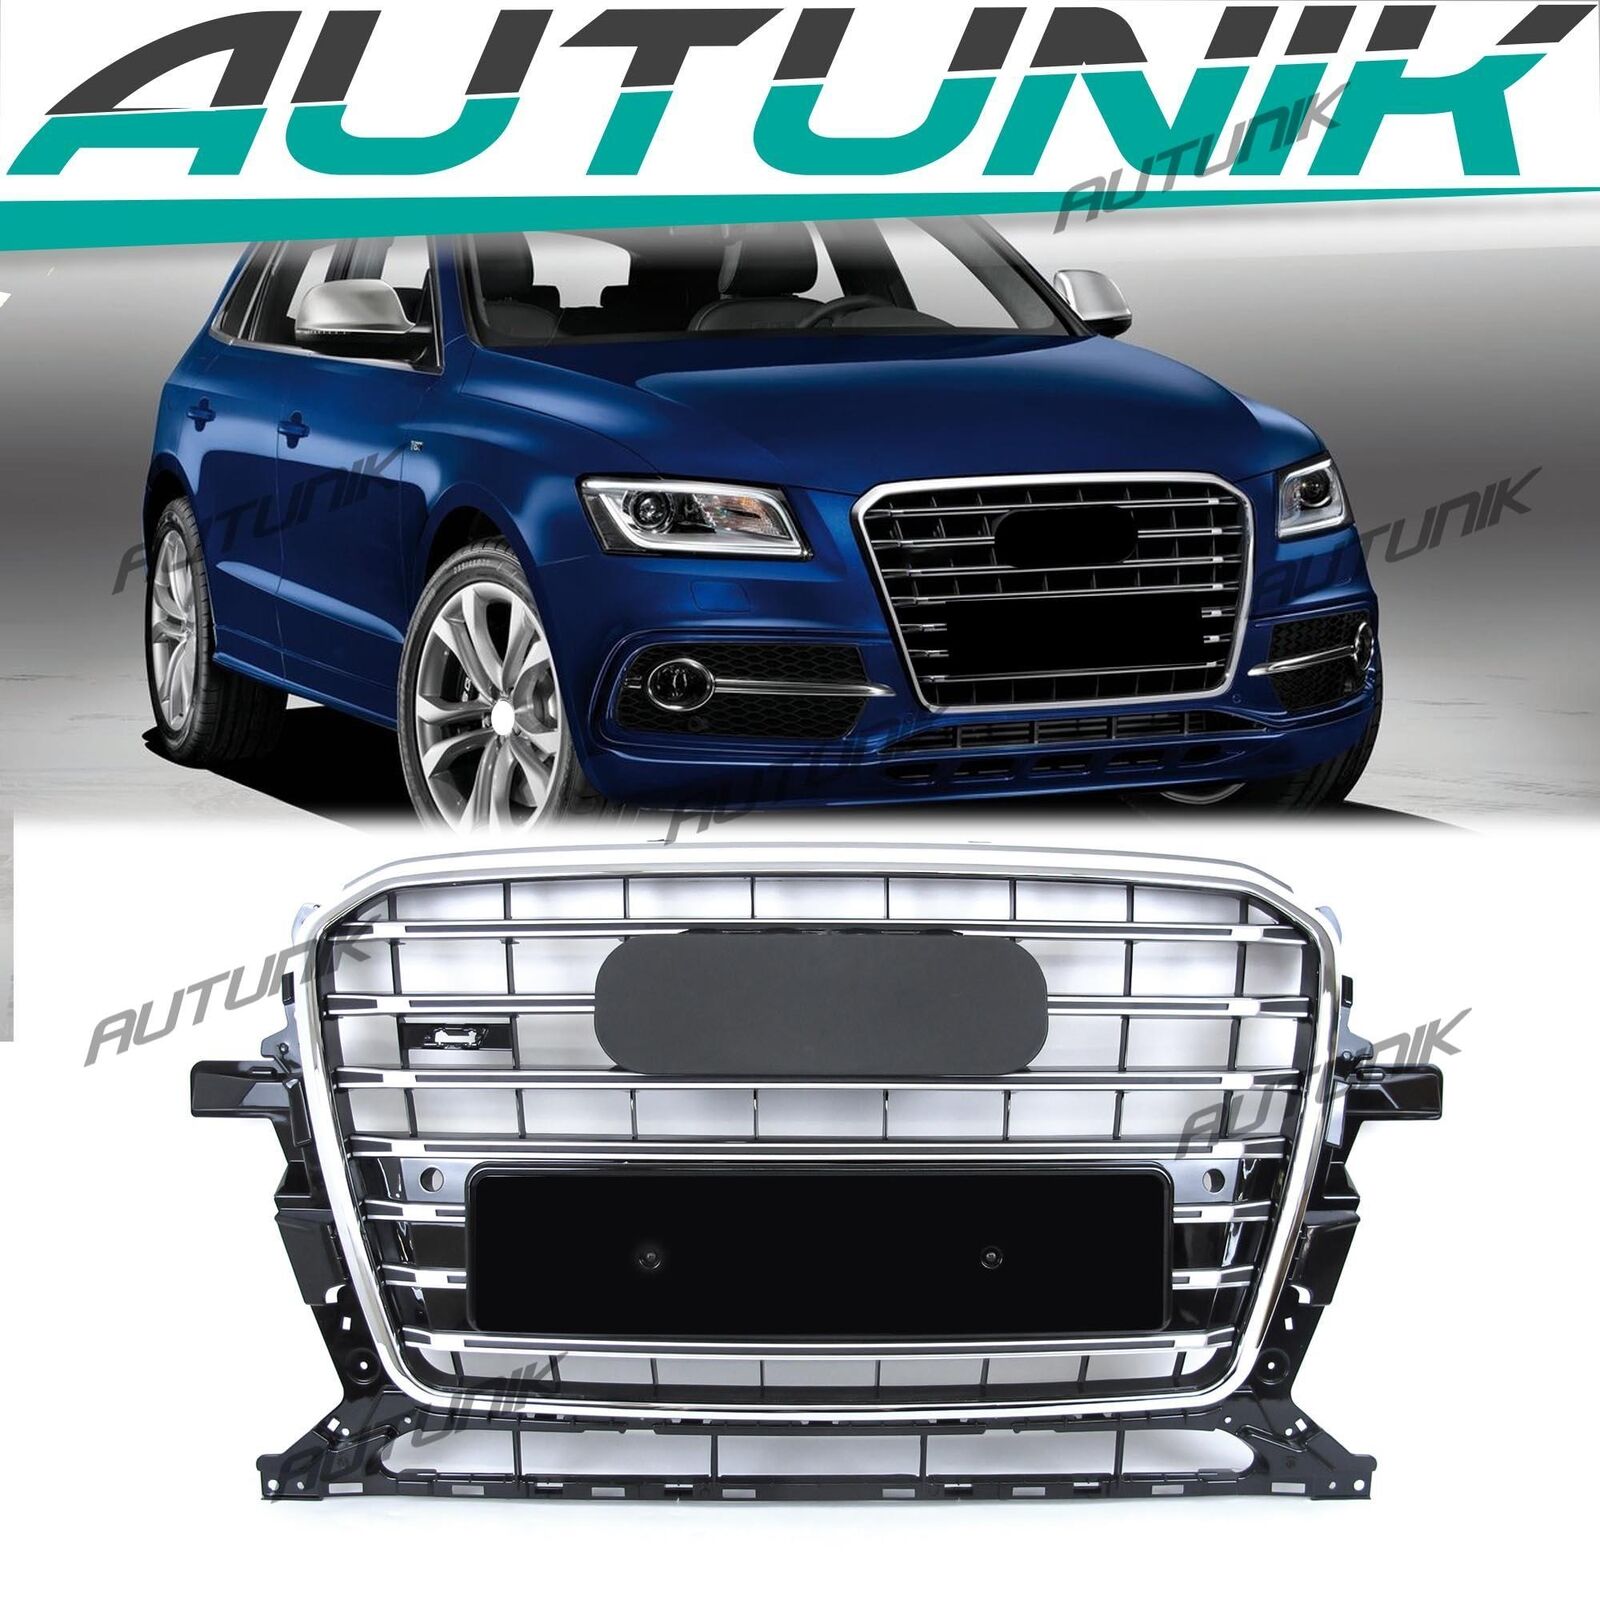 SQ5 Style Chrome Front Grill For Audi Q5 2013-2017 Non S-Line